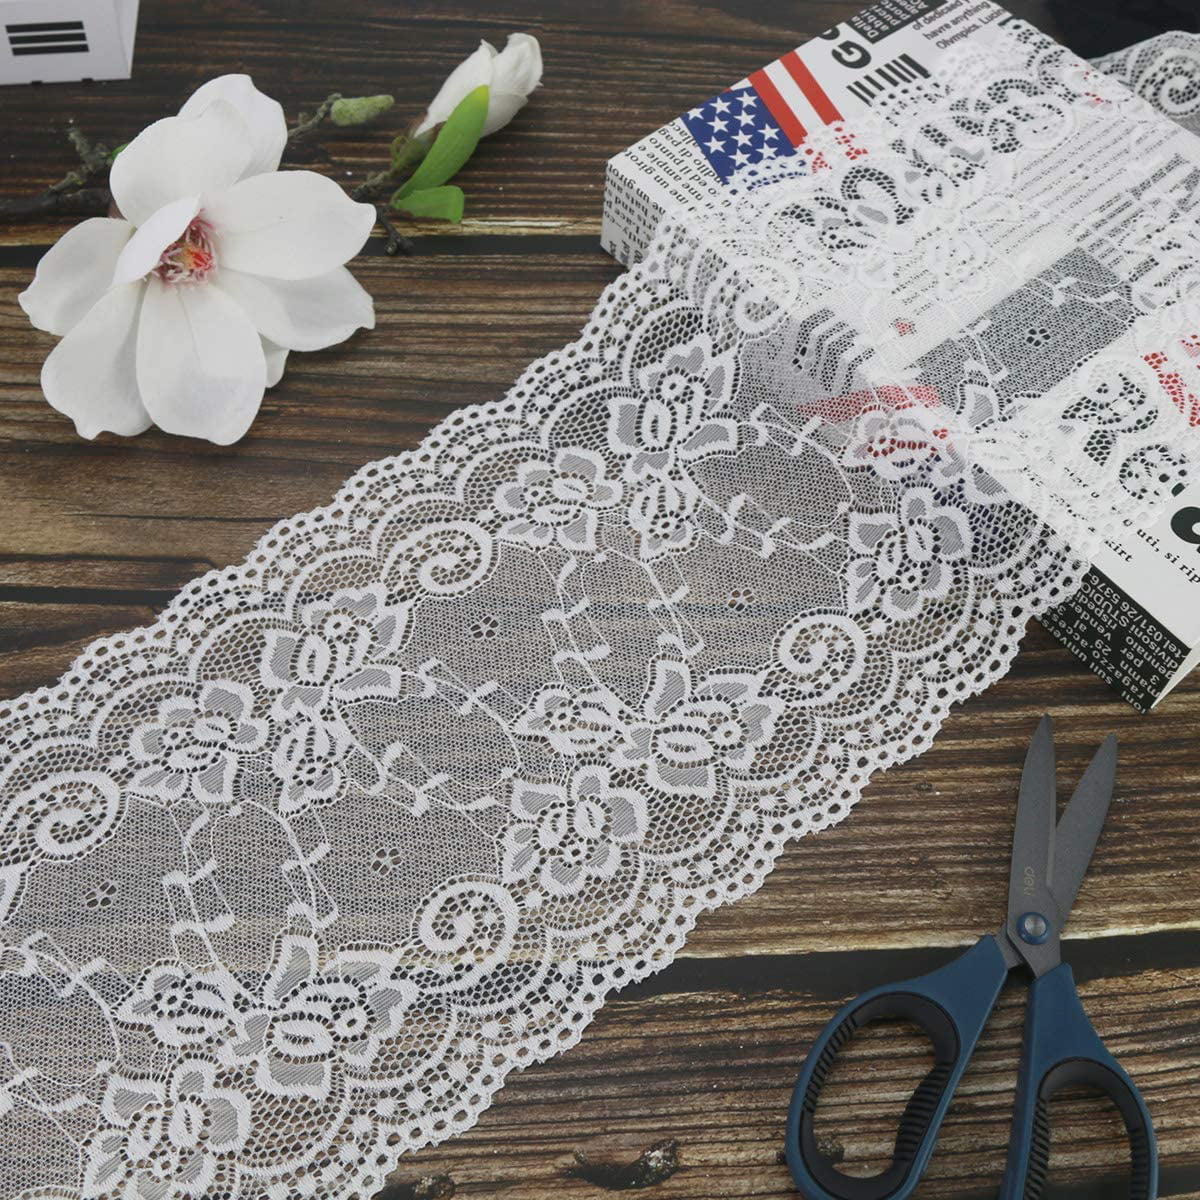 2.4 Inch White Lace Ribbon,Sewing Lace Trim, Elastic Stretchy White Lace  Fabric - 5 Yard,Perfect for Crafting,Sewing Making,Gift Wrapping and Bridal